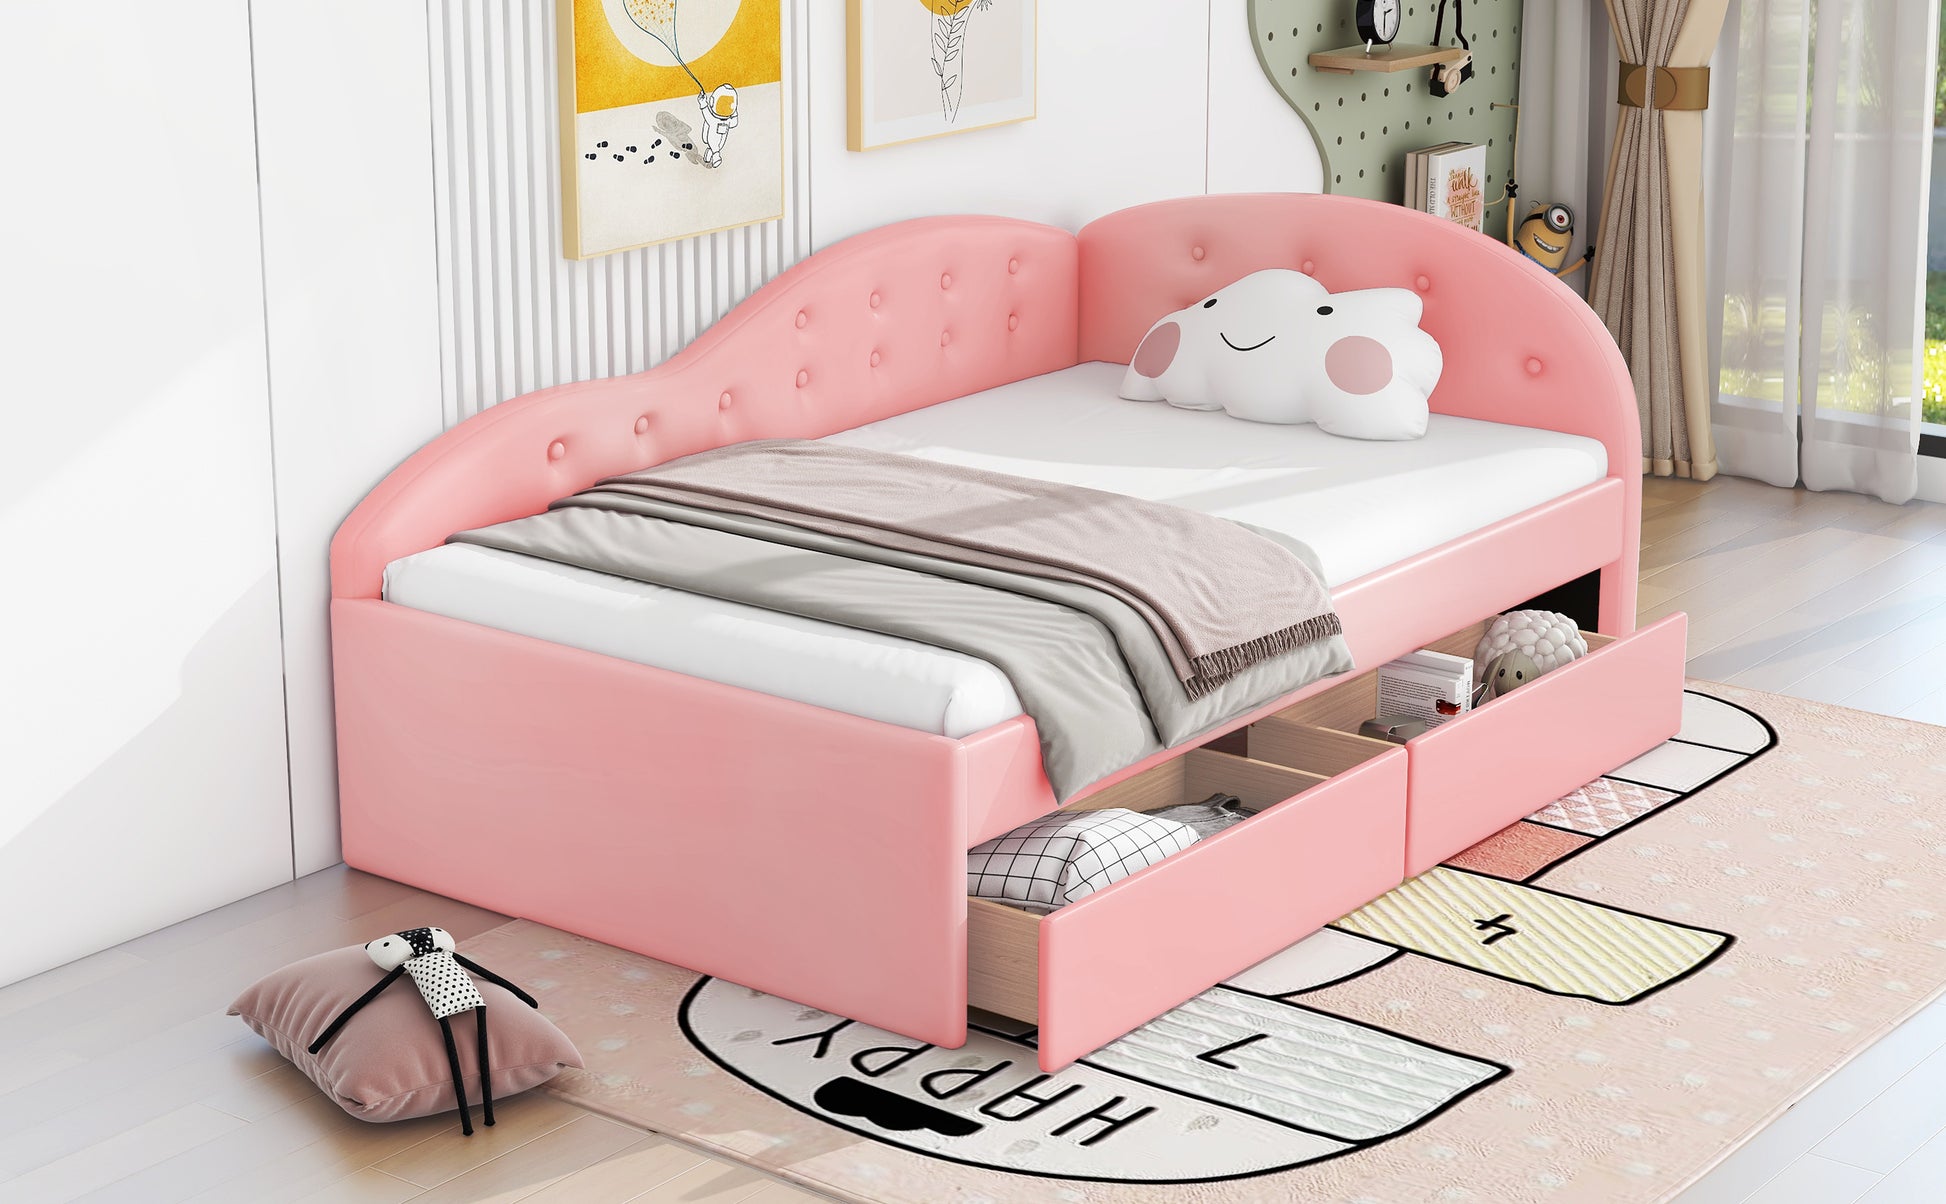 Twin Size PU Upholstered Tufted Daybed with Two Drawers and Cloud Shaped Guardrail, Pink - Enova Luxe Home Store